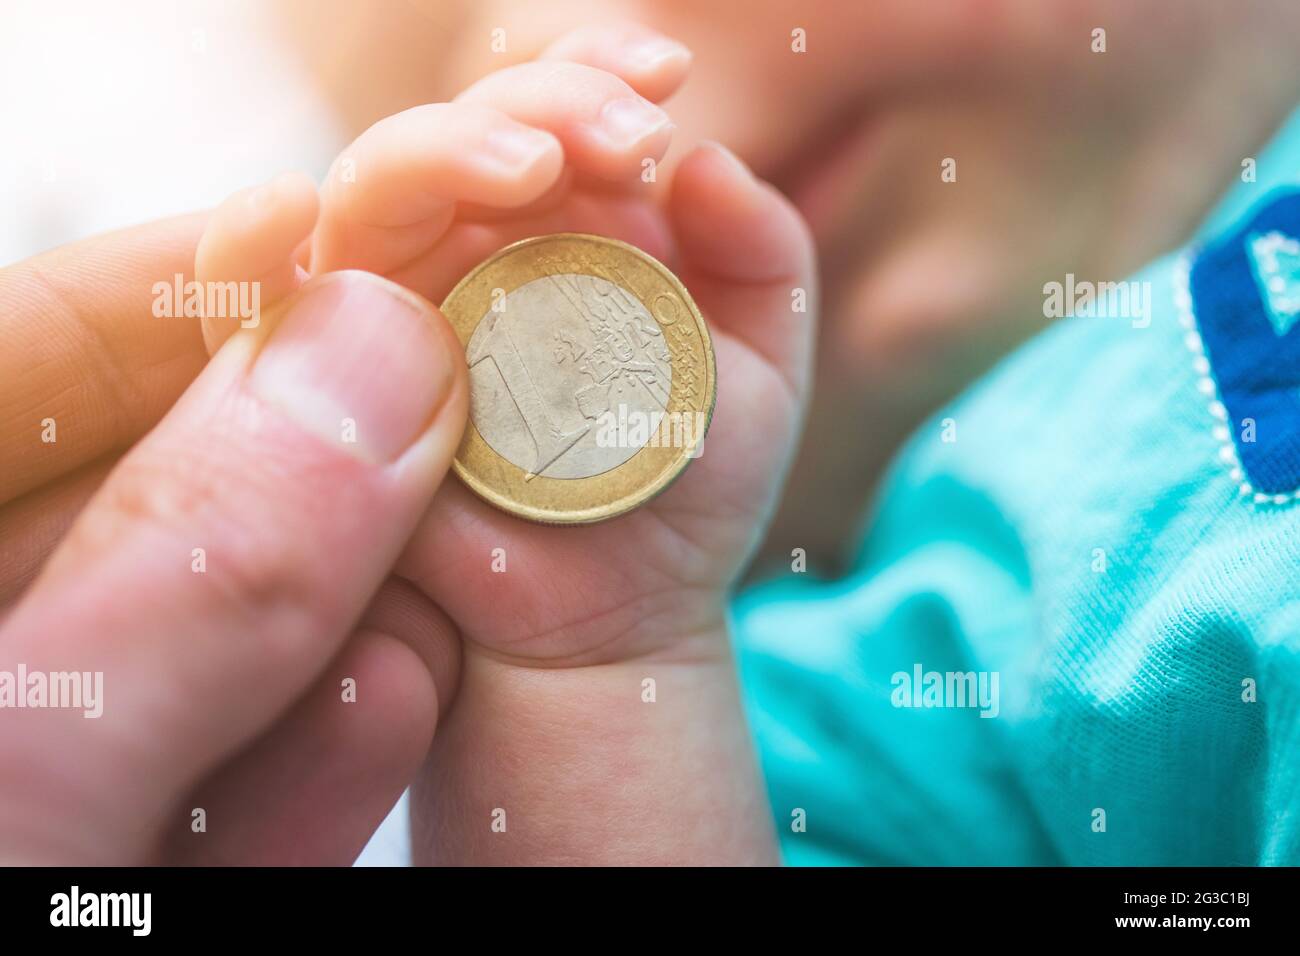 Close up of newborn baby hands holding a coin, retirement arrangement concept Stock Photo